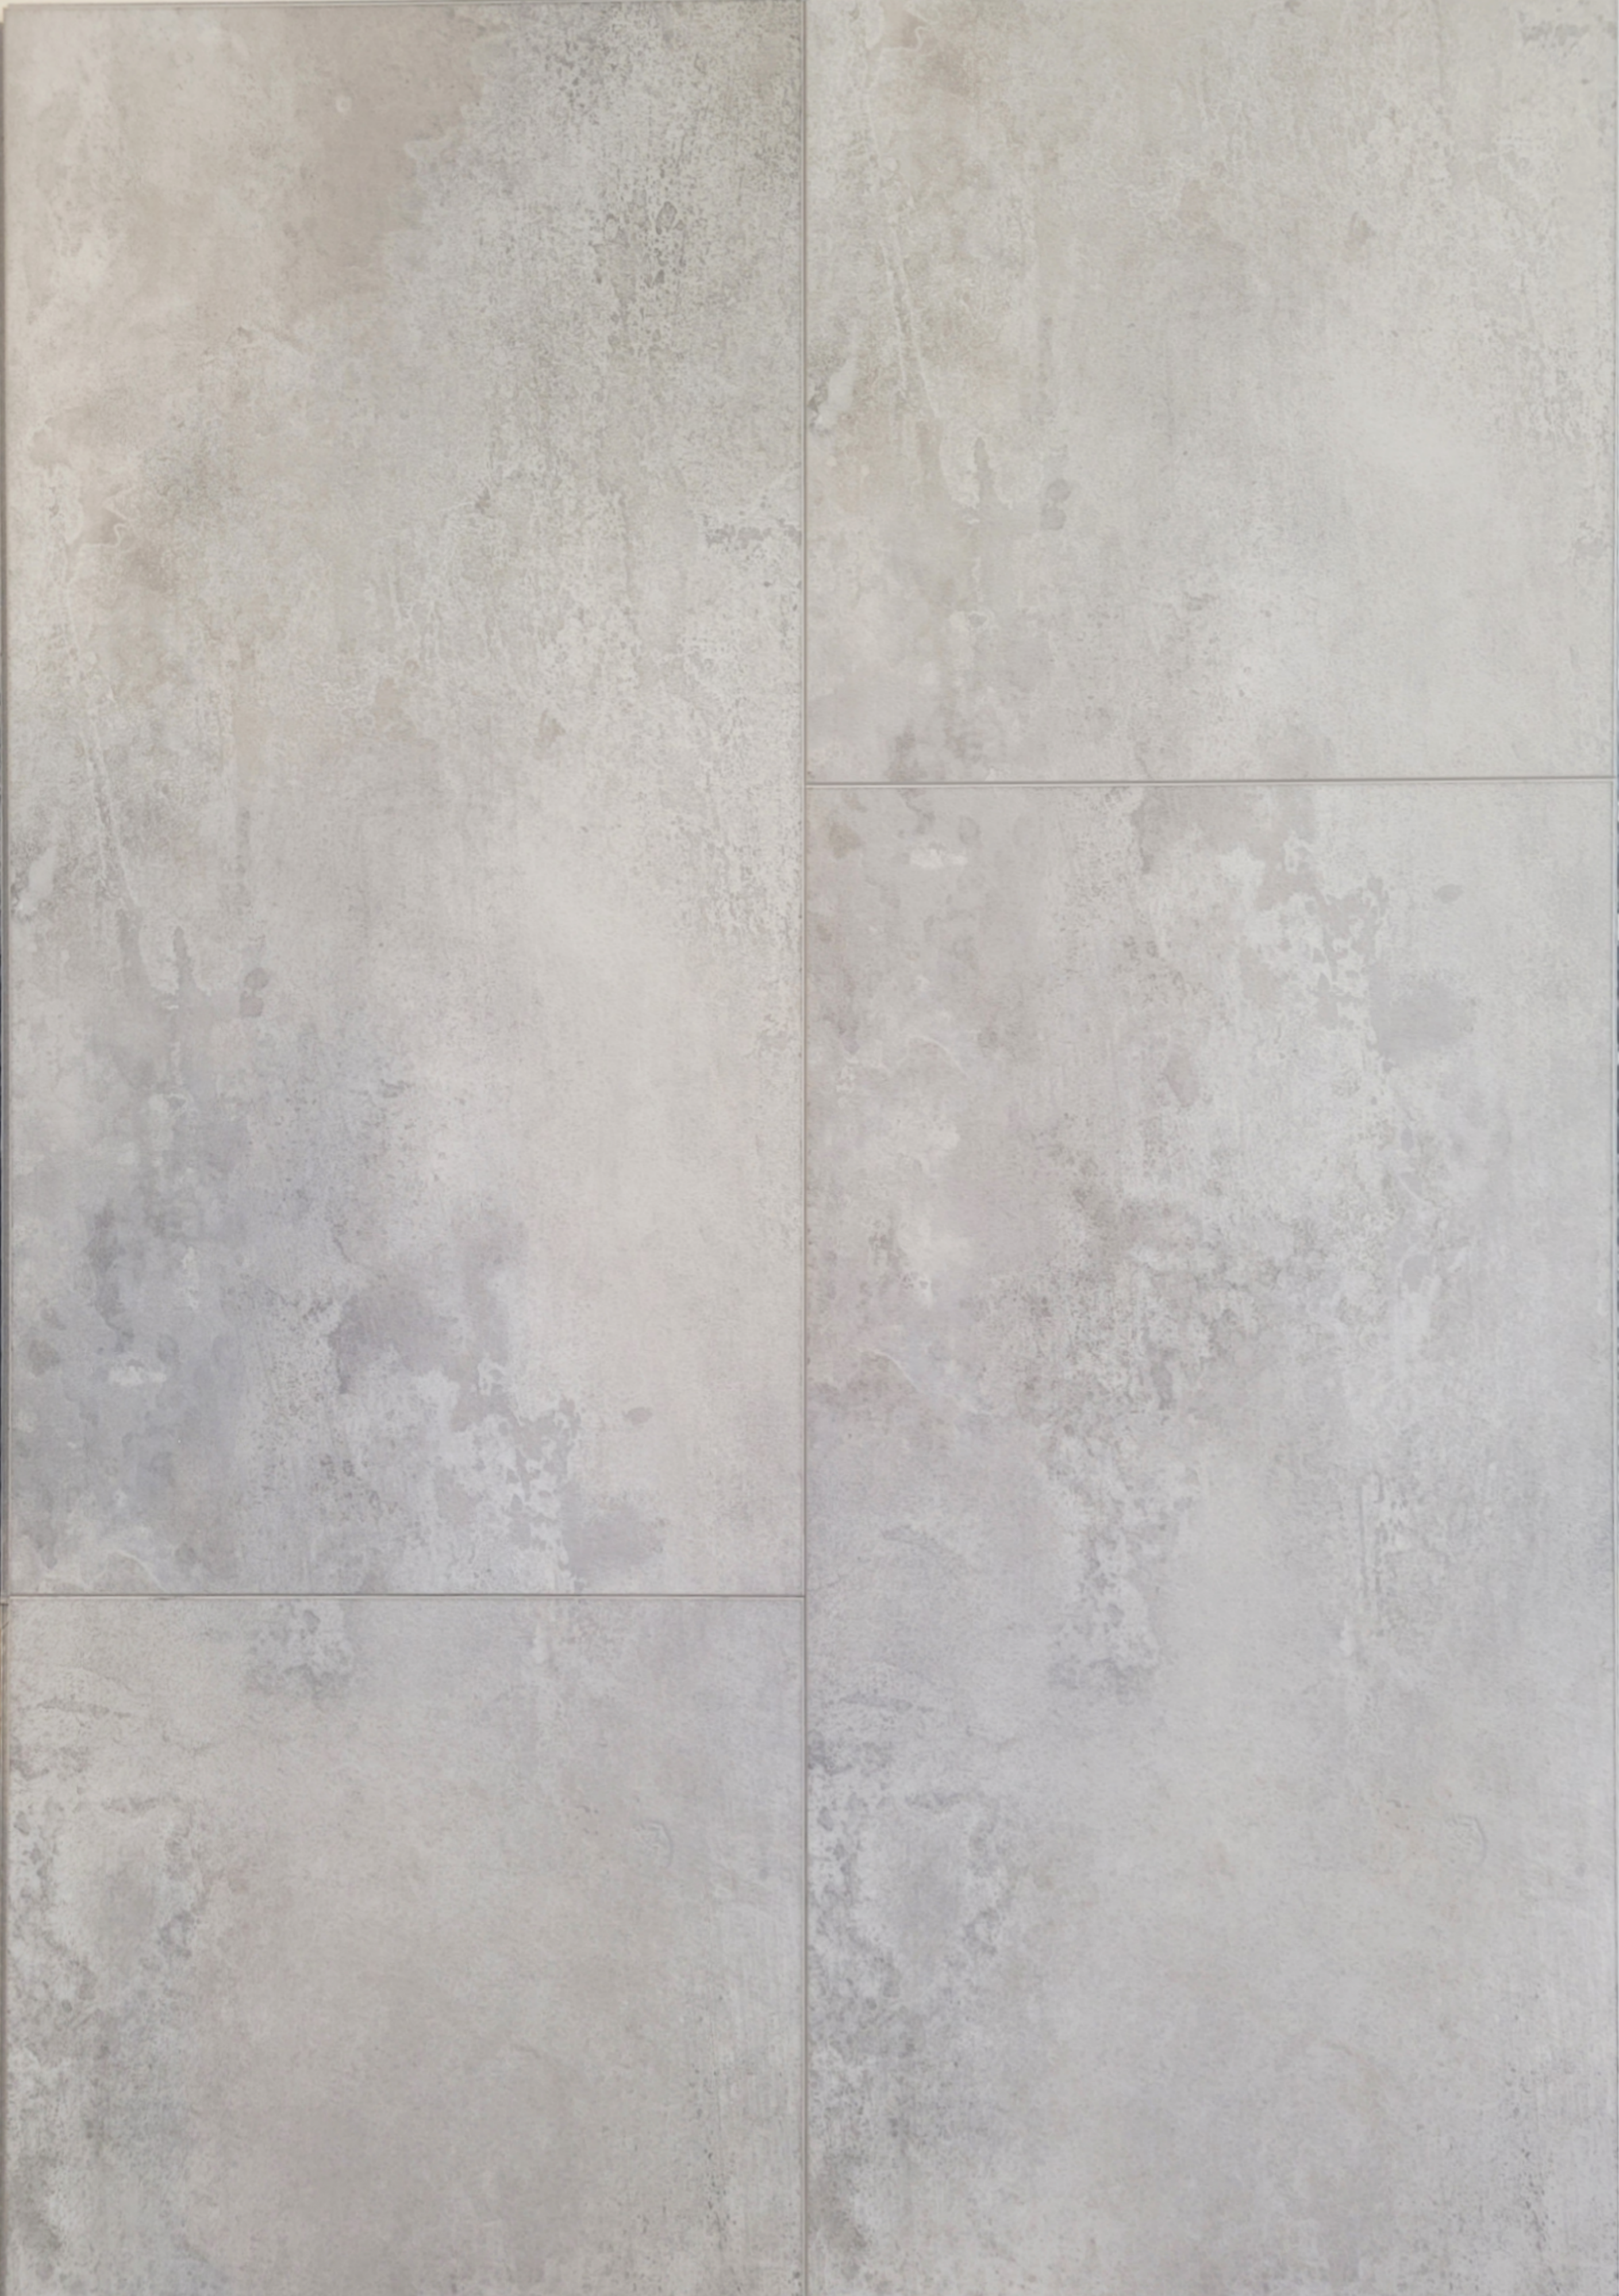 Mountains Grey Luxury Vinyl Tile (pad attached) $3.99/sf 19.38 sf/box